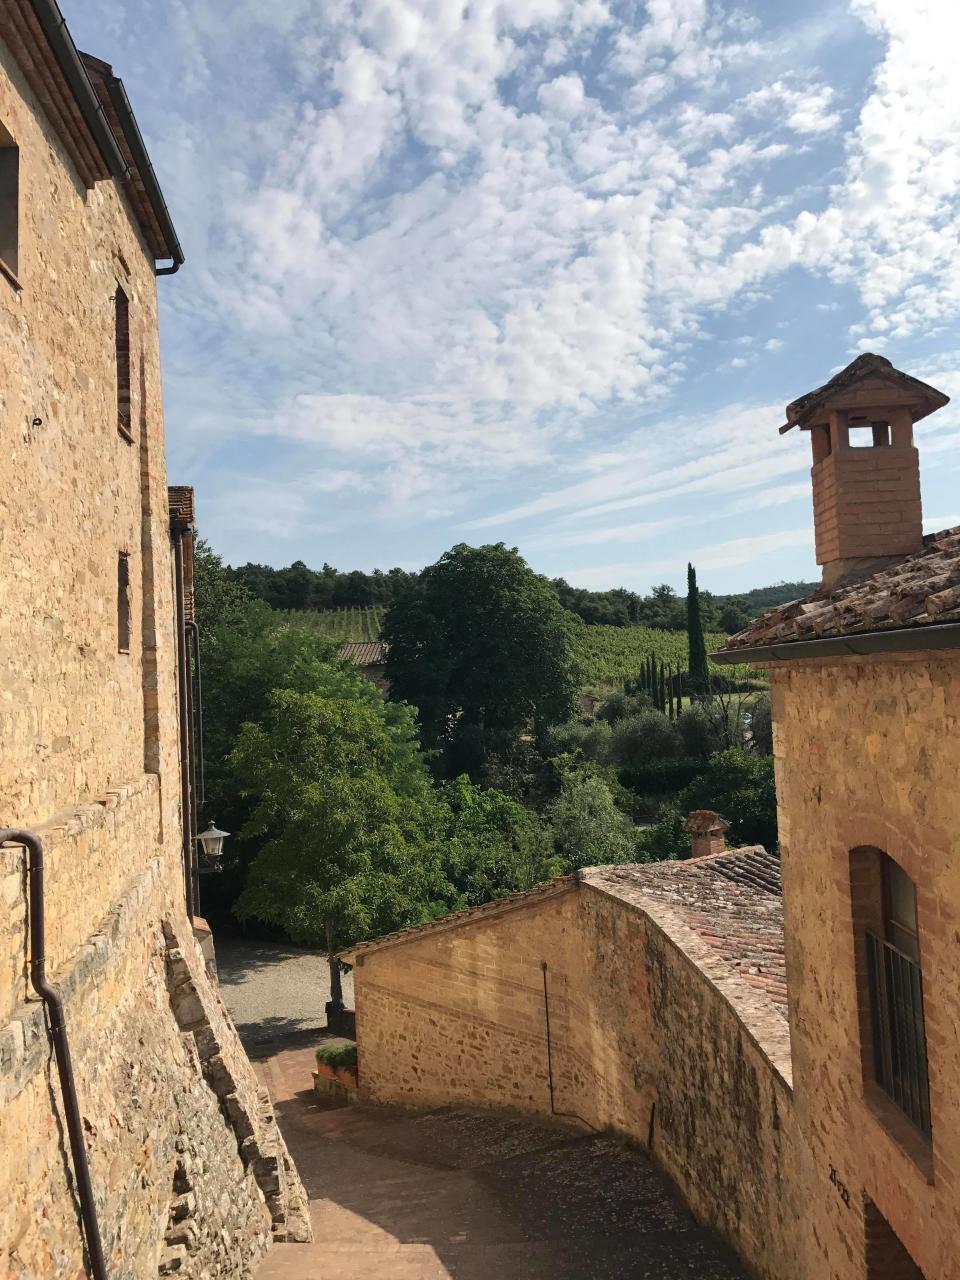 Walking the grounds at Castel Monastero is like being in a time warp. Photo: Carly Williams